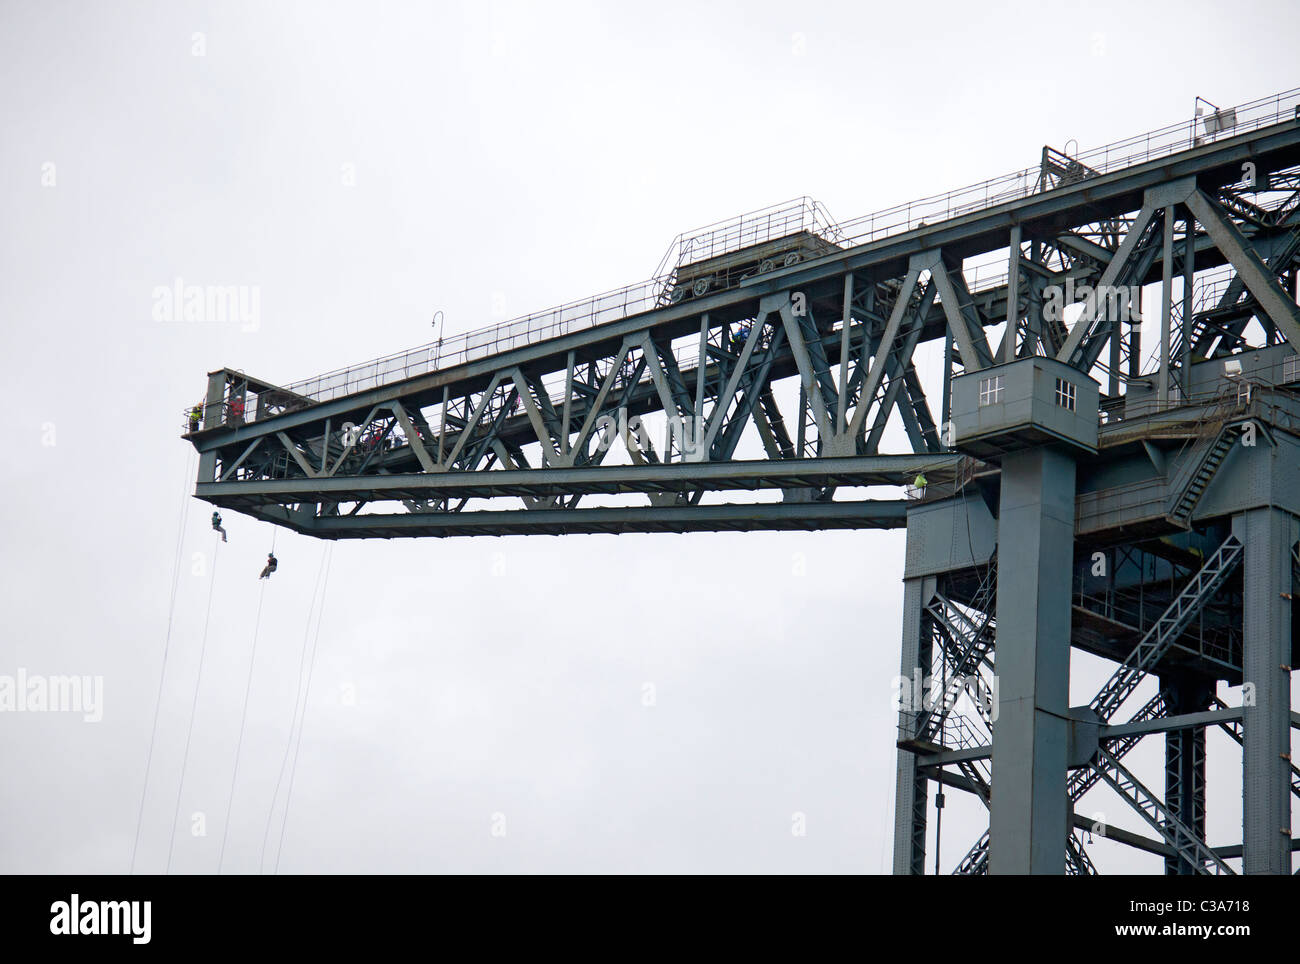 Two people complete a charity abseil from the Finnieston Crane, Stobcross Glasgow. Scotland, UK. Stock Photo